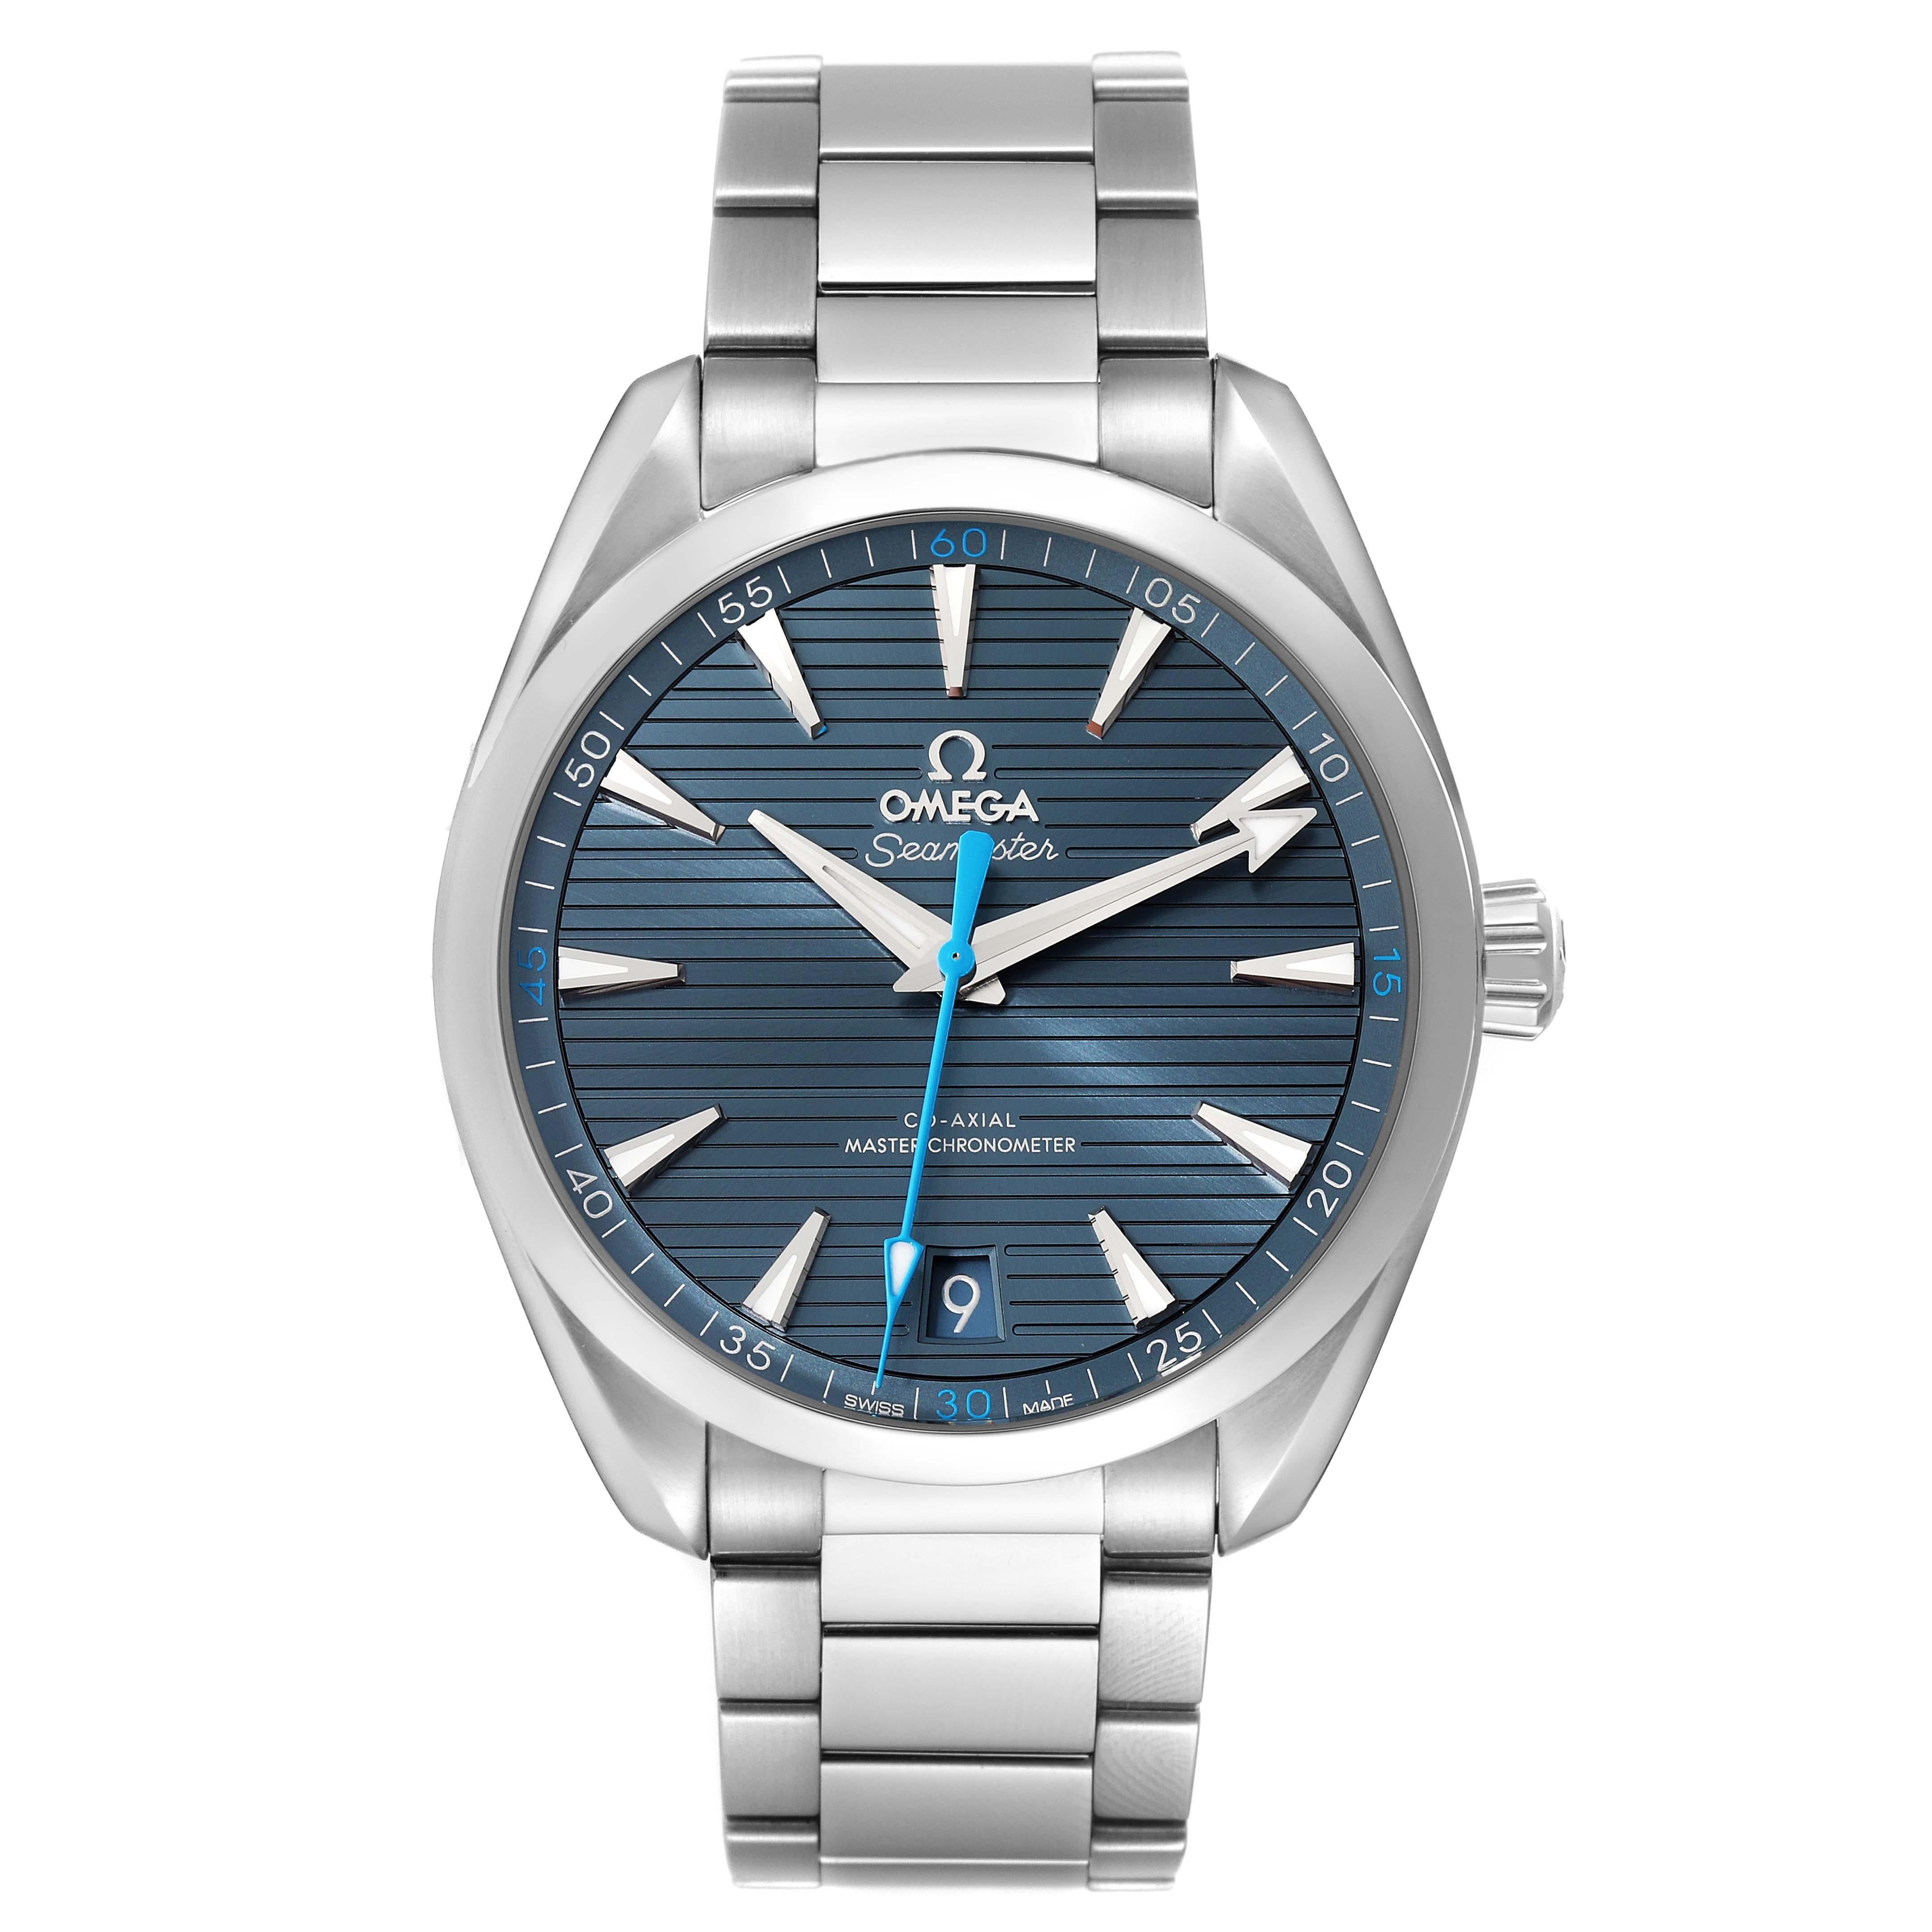 Omega Seamaster Aqua Terra Steel Mens Watch 220.10.41.21.03.002 Box Card. Automatic self-winding movement. Stainless steel round case 41.0 mm in diameter. Case thickness 13.2 mm. Transparent exhibition sapphire crystal case back. Stainless steel